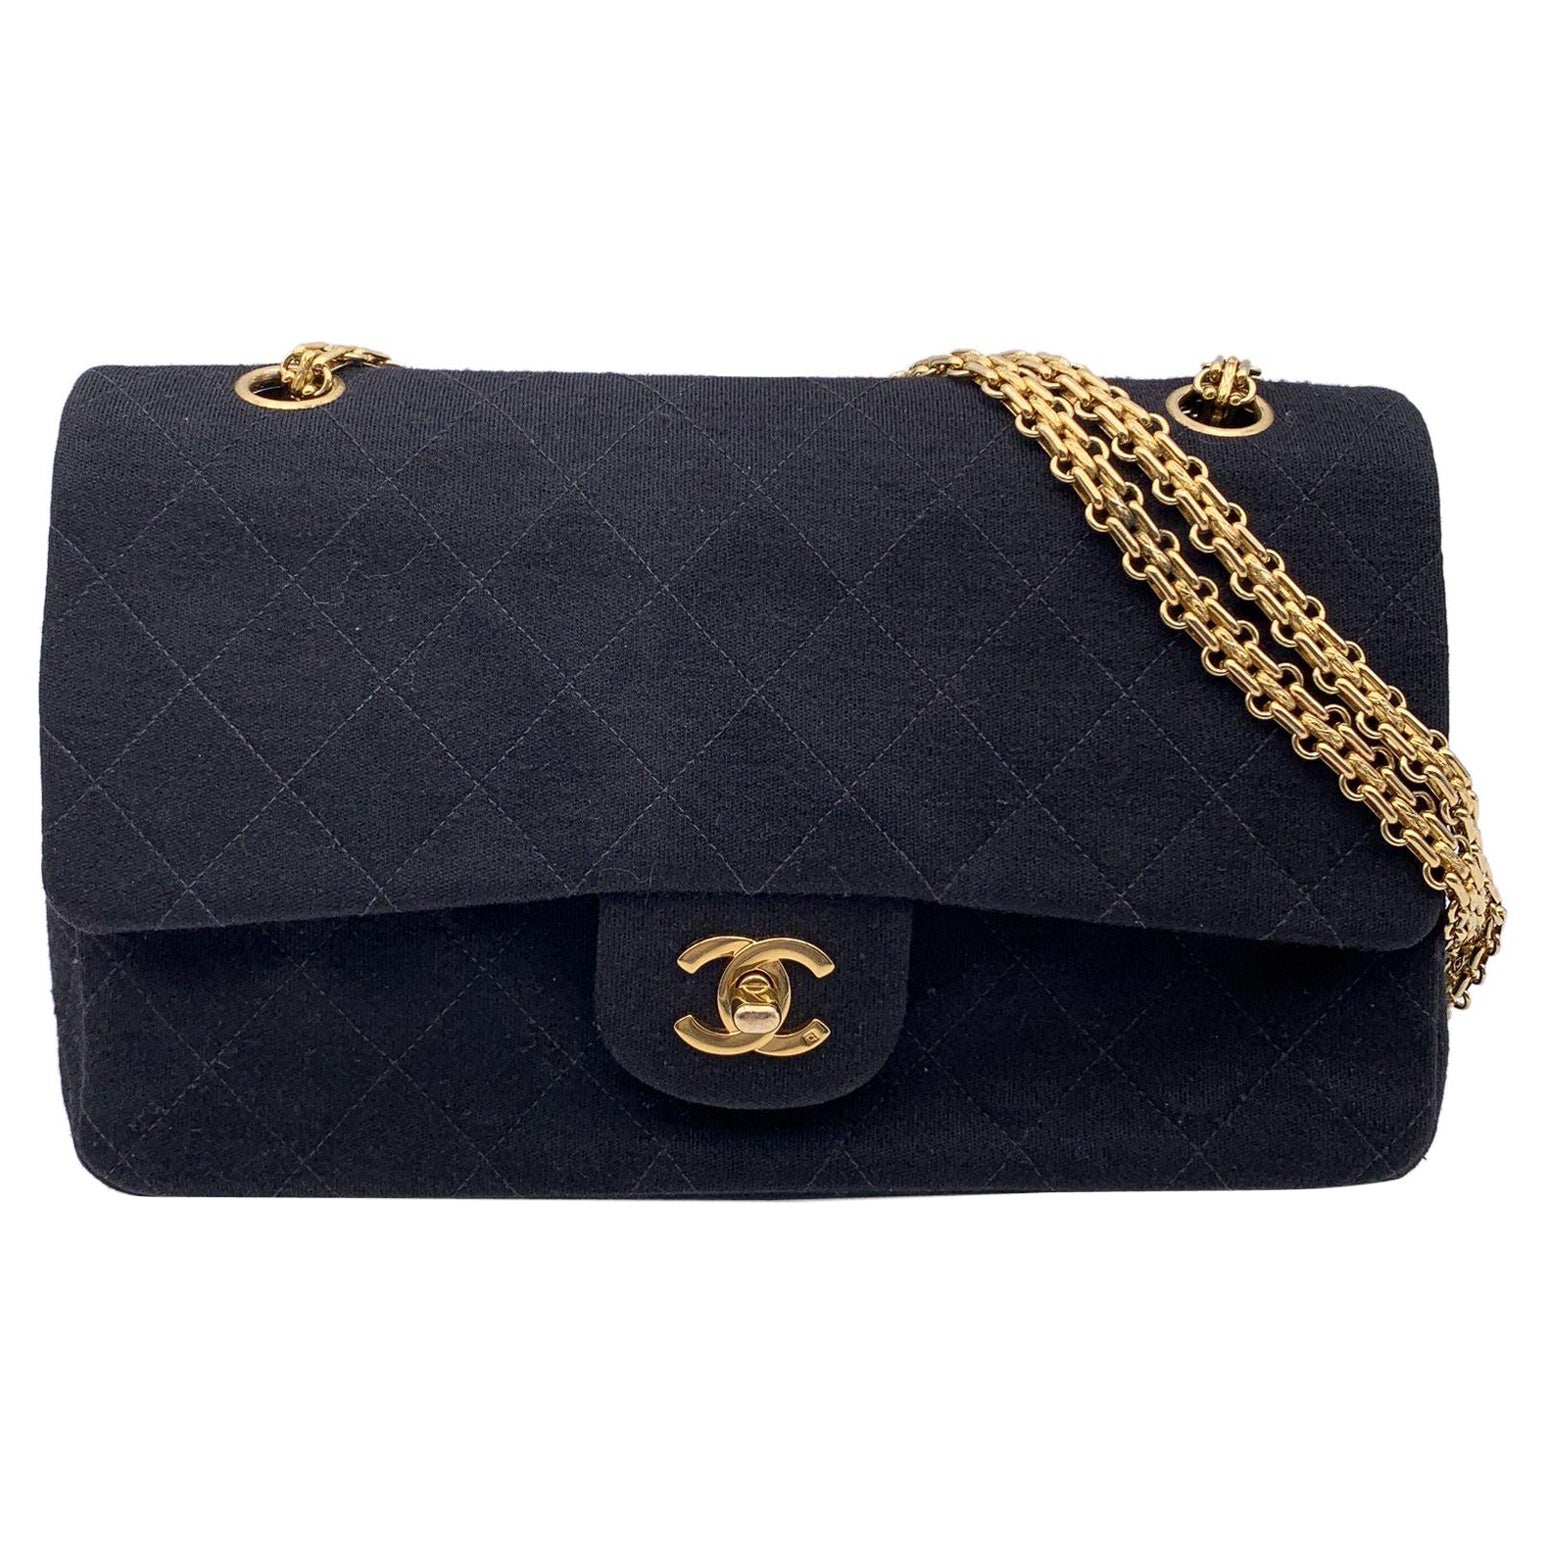 Chanel Vintage Black Jersey Double Flap 2.55 Bag Mademoiselle Chain